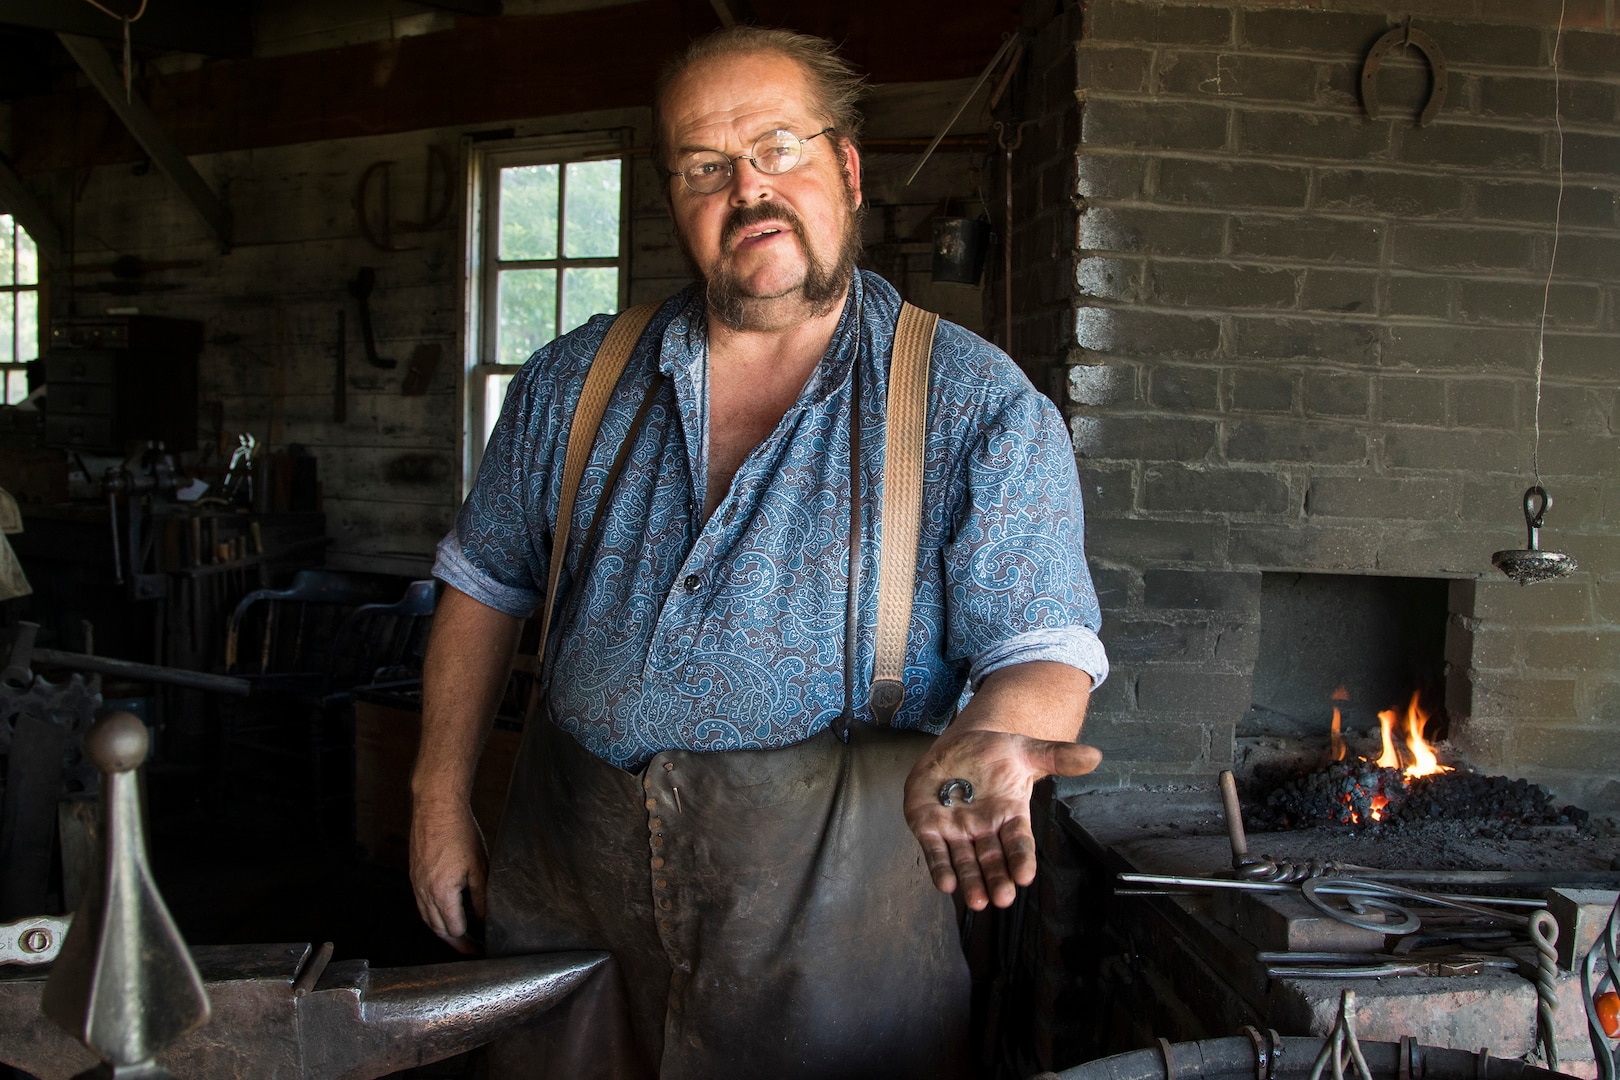 Since the terrorist attacks on Sept. 11, 2001, Randy Dack, a blacksmith at Grand Island’s Stuhr Museum in Nebraska, has made more than 4,000 "lucky" horseshoes for military service members worldwide. Dack made his first "Soldier's shoe" for his son prior to his first deployment in 2002 with the Nebraska Army National Guard's 1-134th Cavalry.